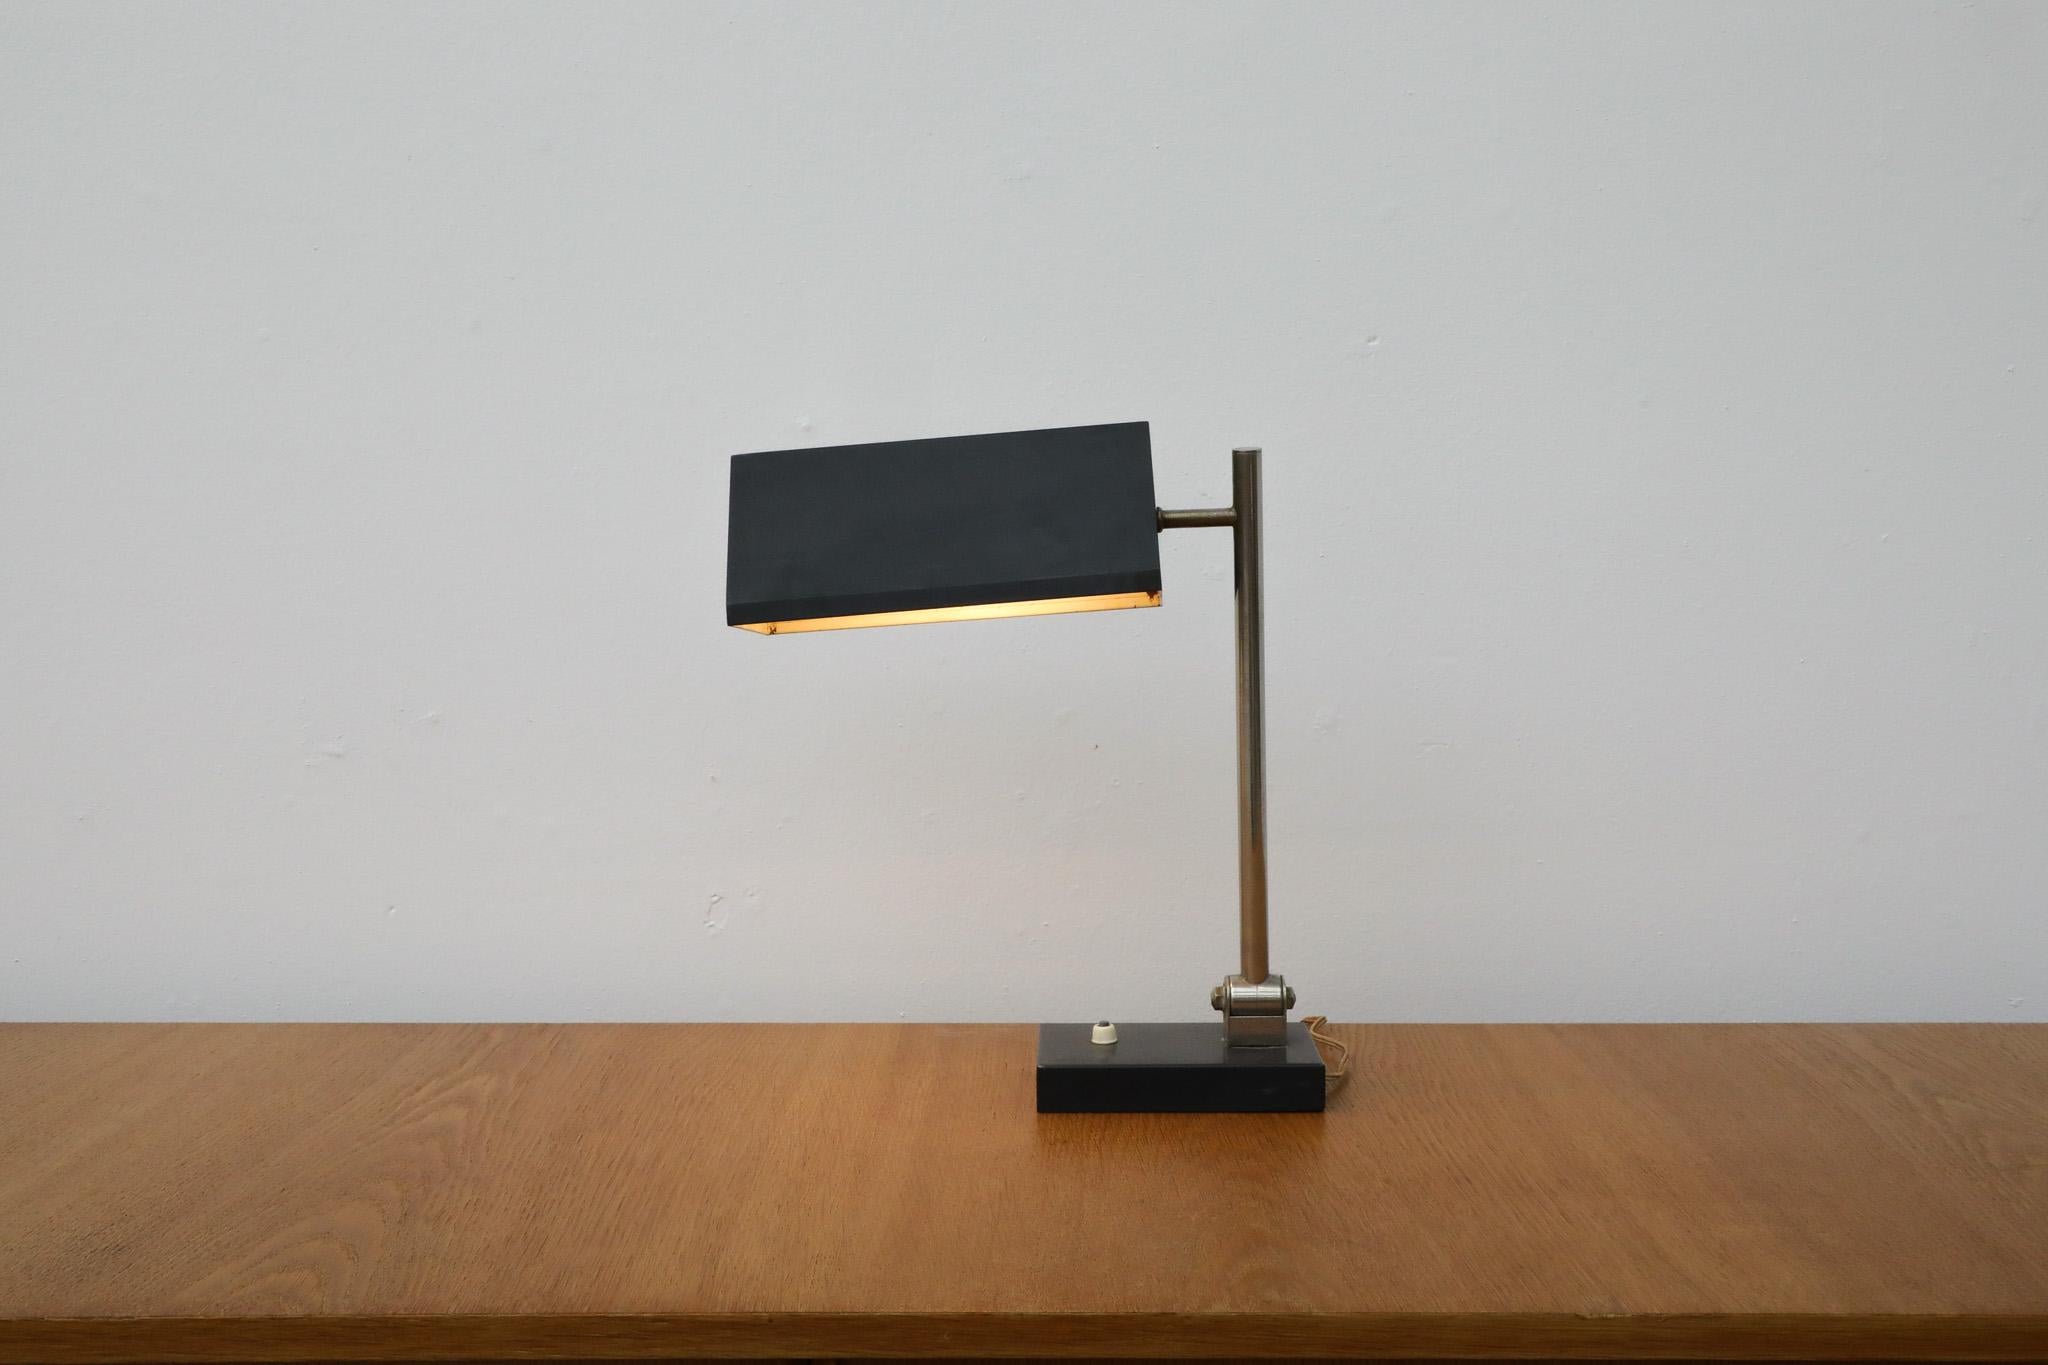 Vintage Mid-Century desk lamp by Dutch post-war design great H. Busquet for the renowned Hala Zeist lighting manufacturing company. Made in the mid 1950s. The light sports a black enameled triangular metal shade seated atop an articulating chrome